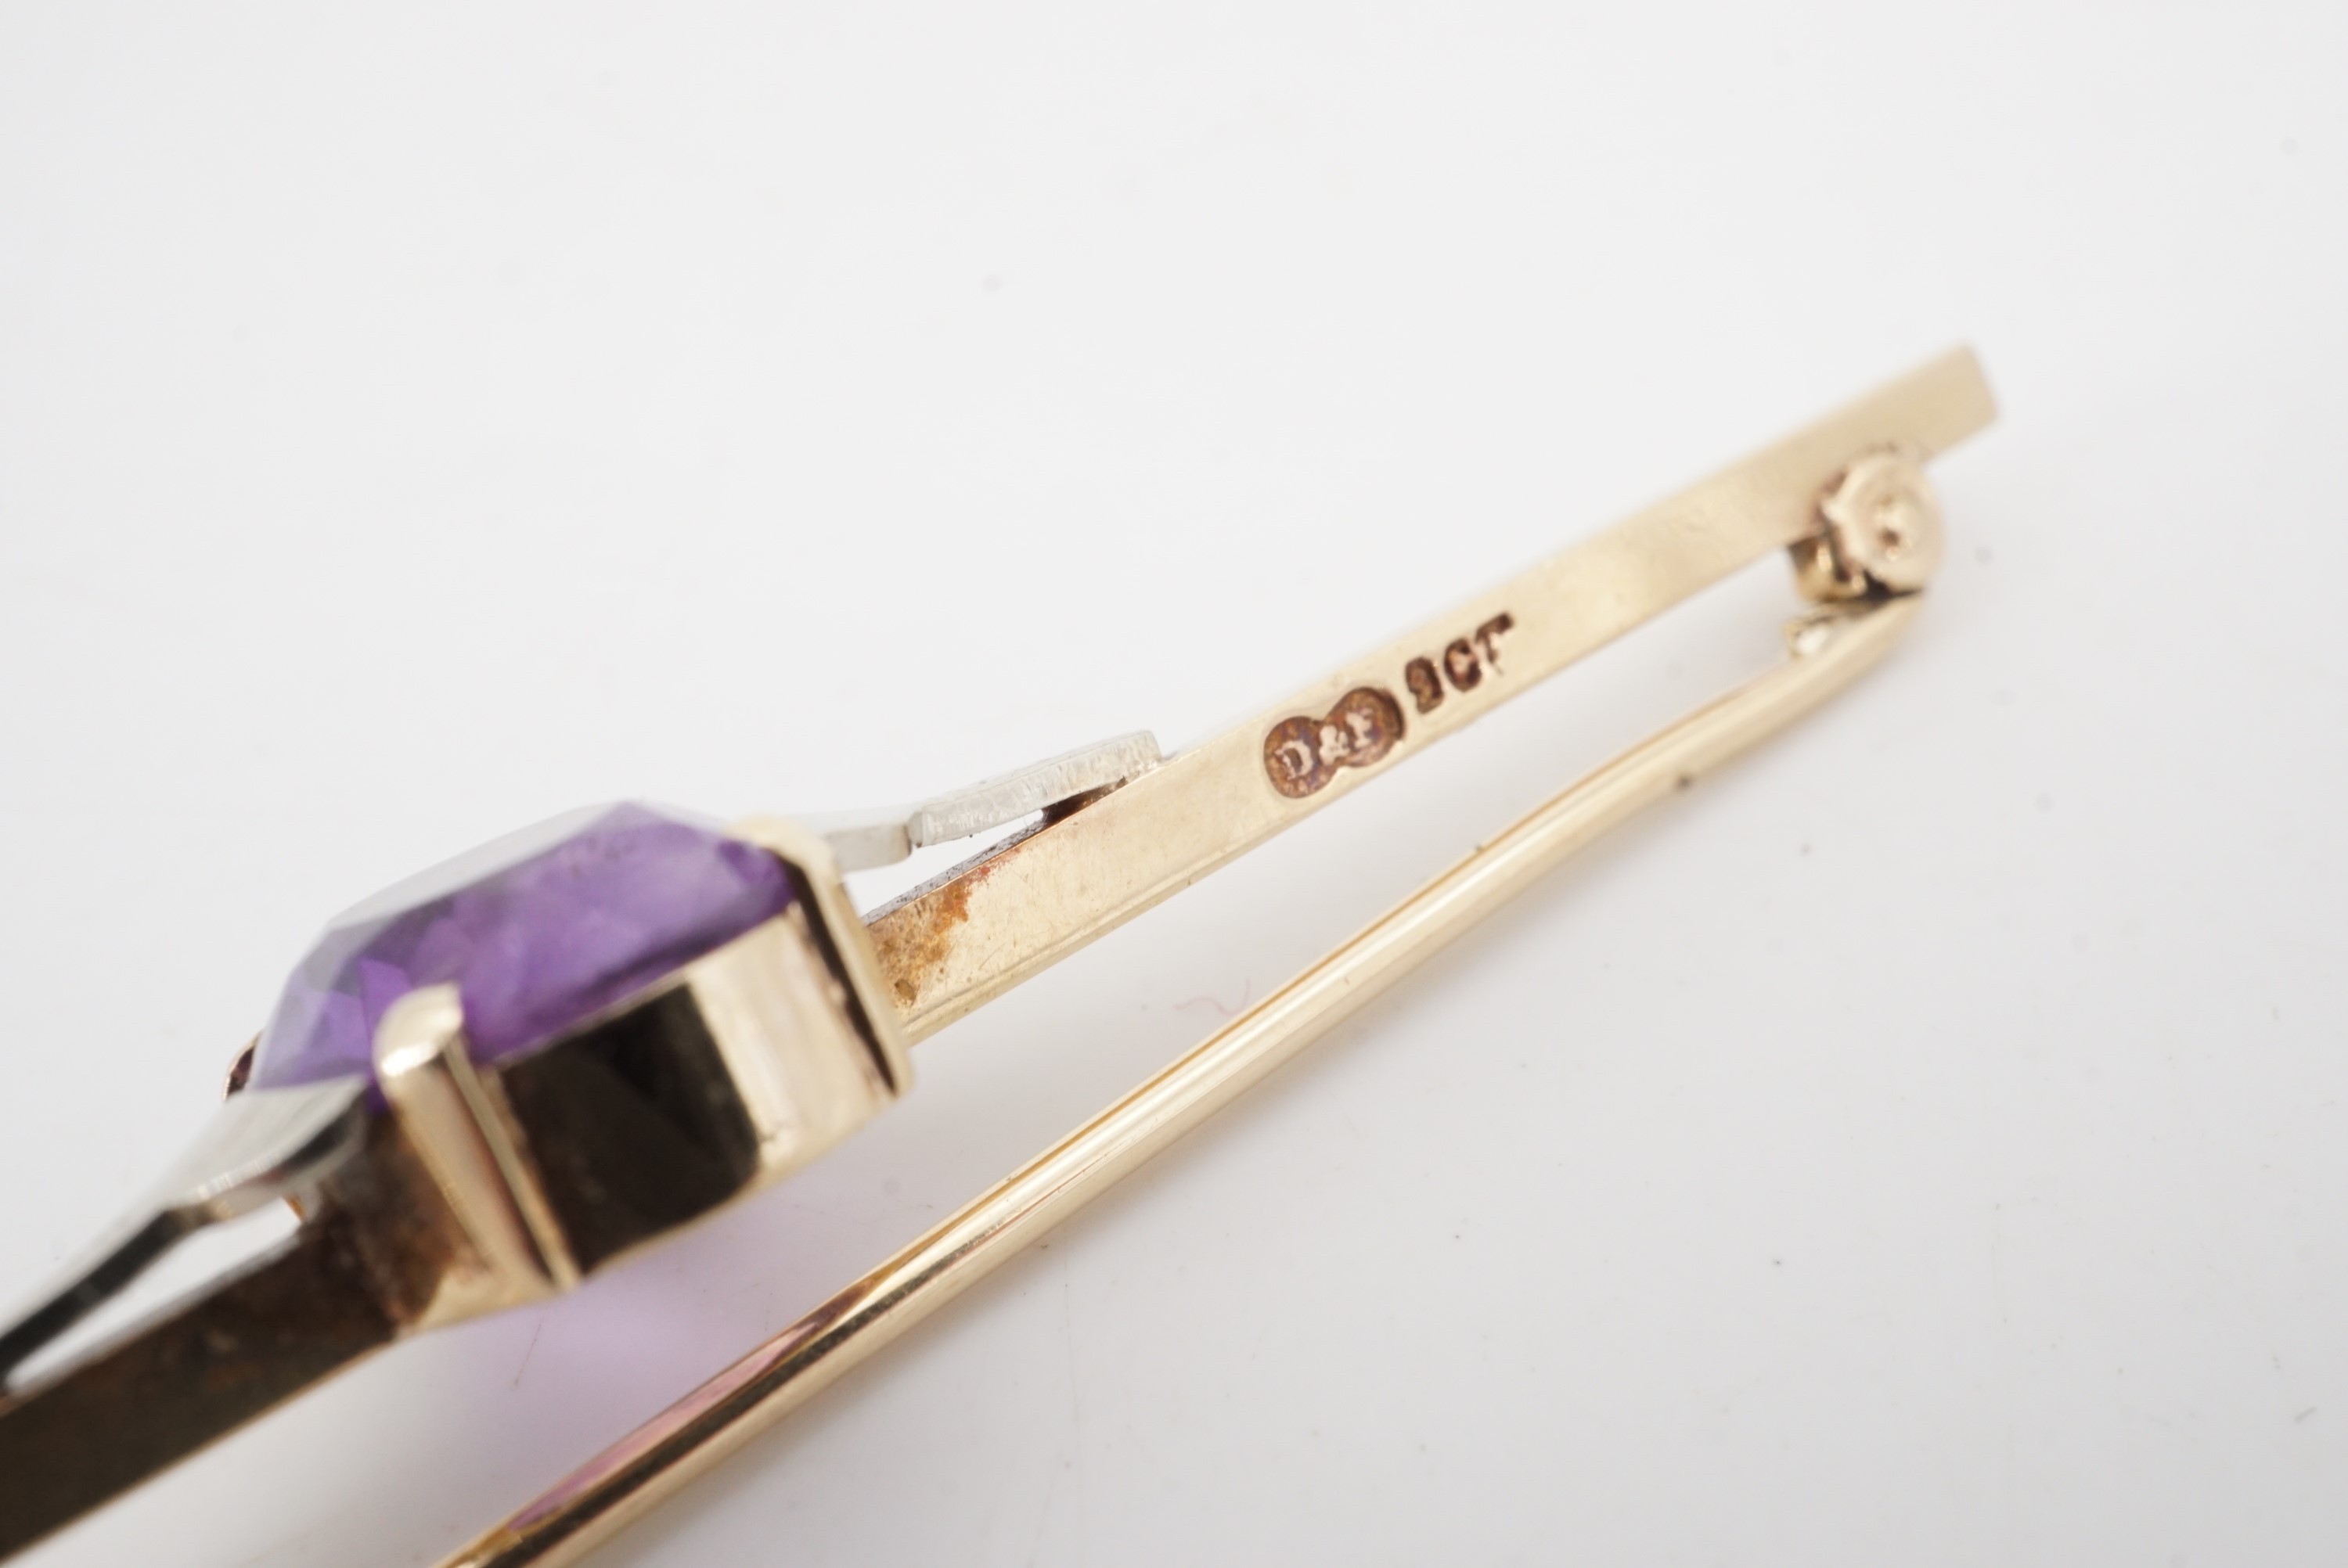 An amethyst and 9 ct gold bar brooch, circa 1930s, stone 11 mm x 8 mm, 6 cm, 3.8 g - Image 3 of 3